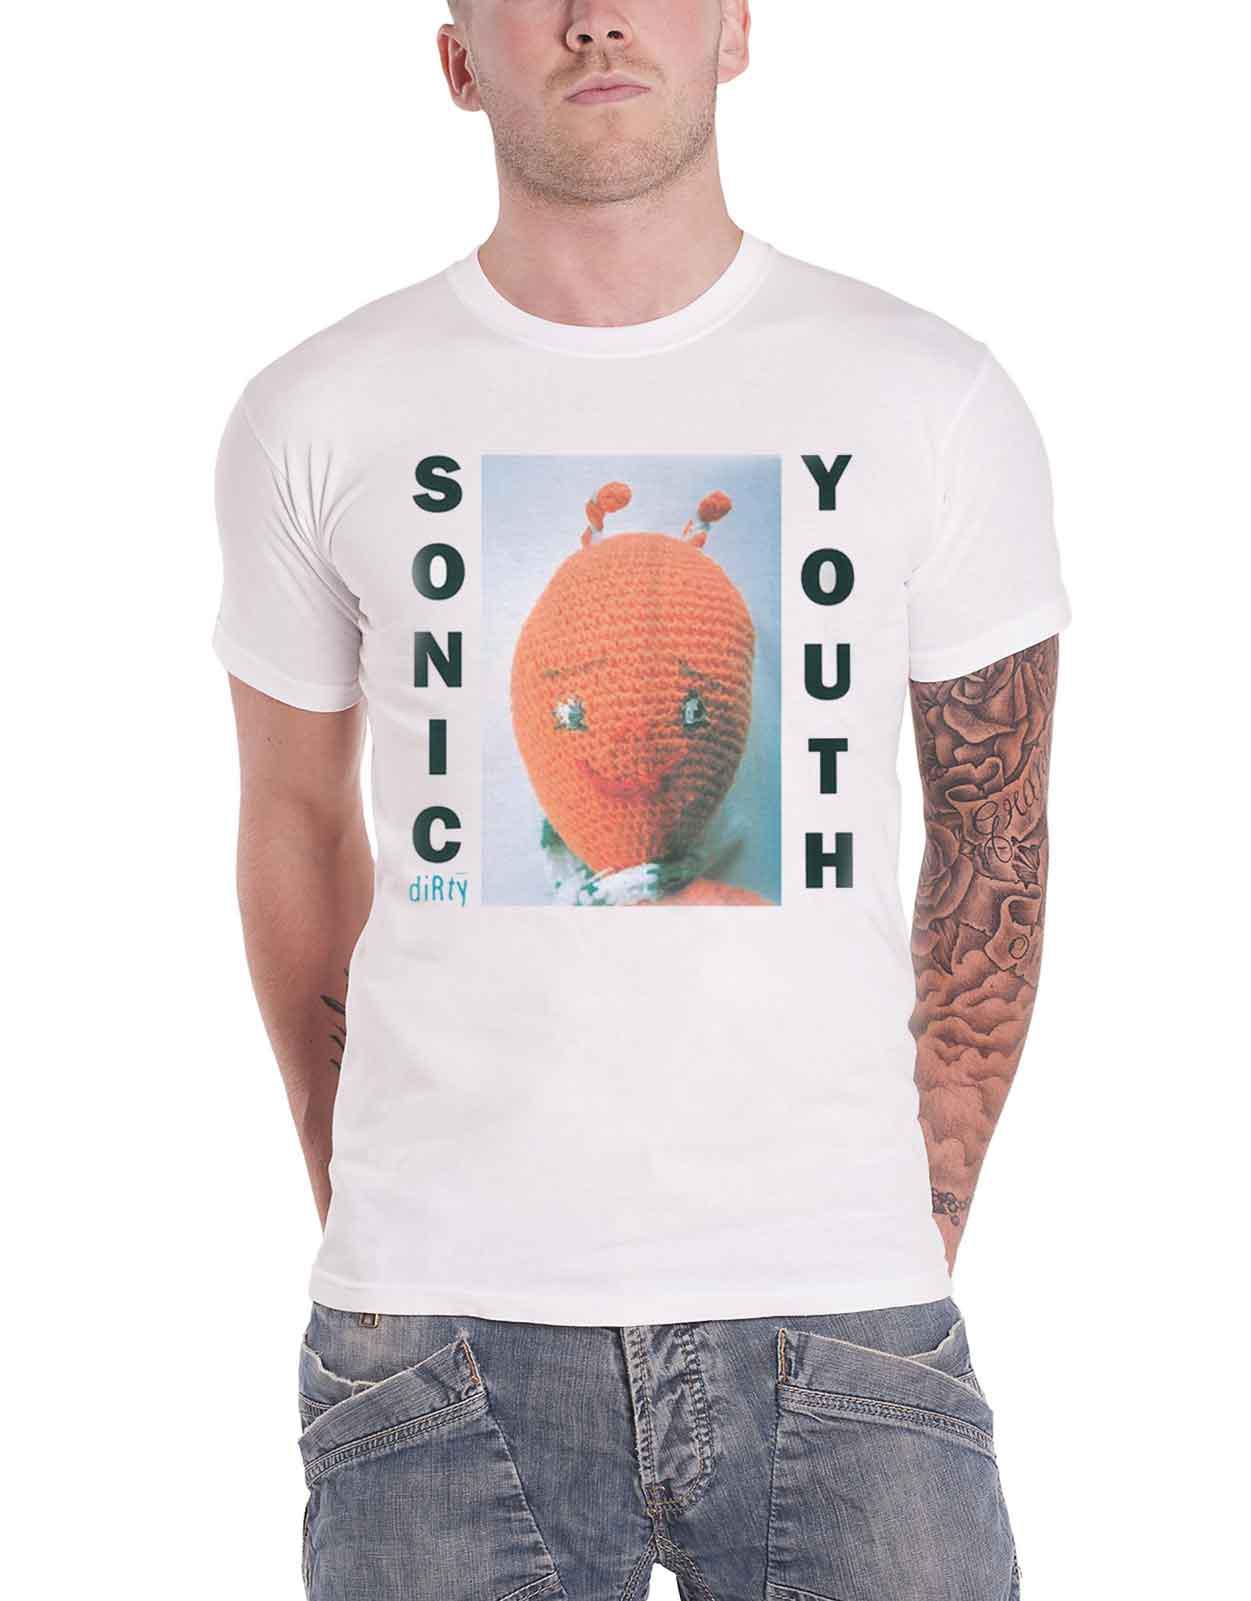 Sonic Youth T Shirt Dirty Album Cover Band logo new Official Mens White